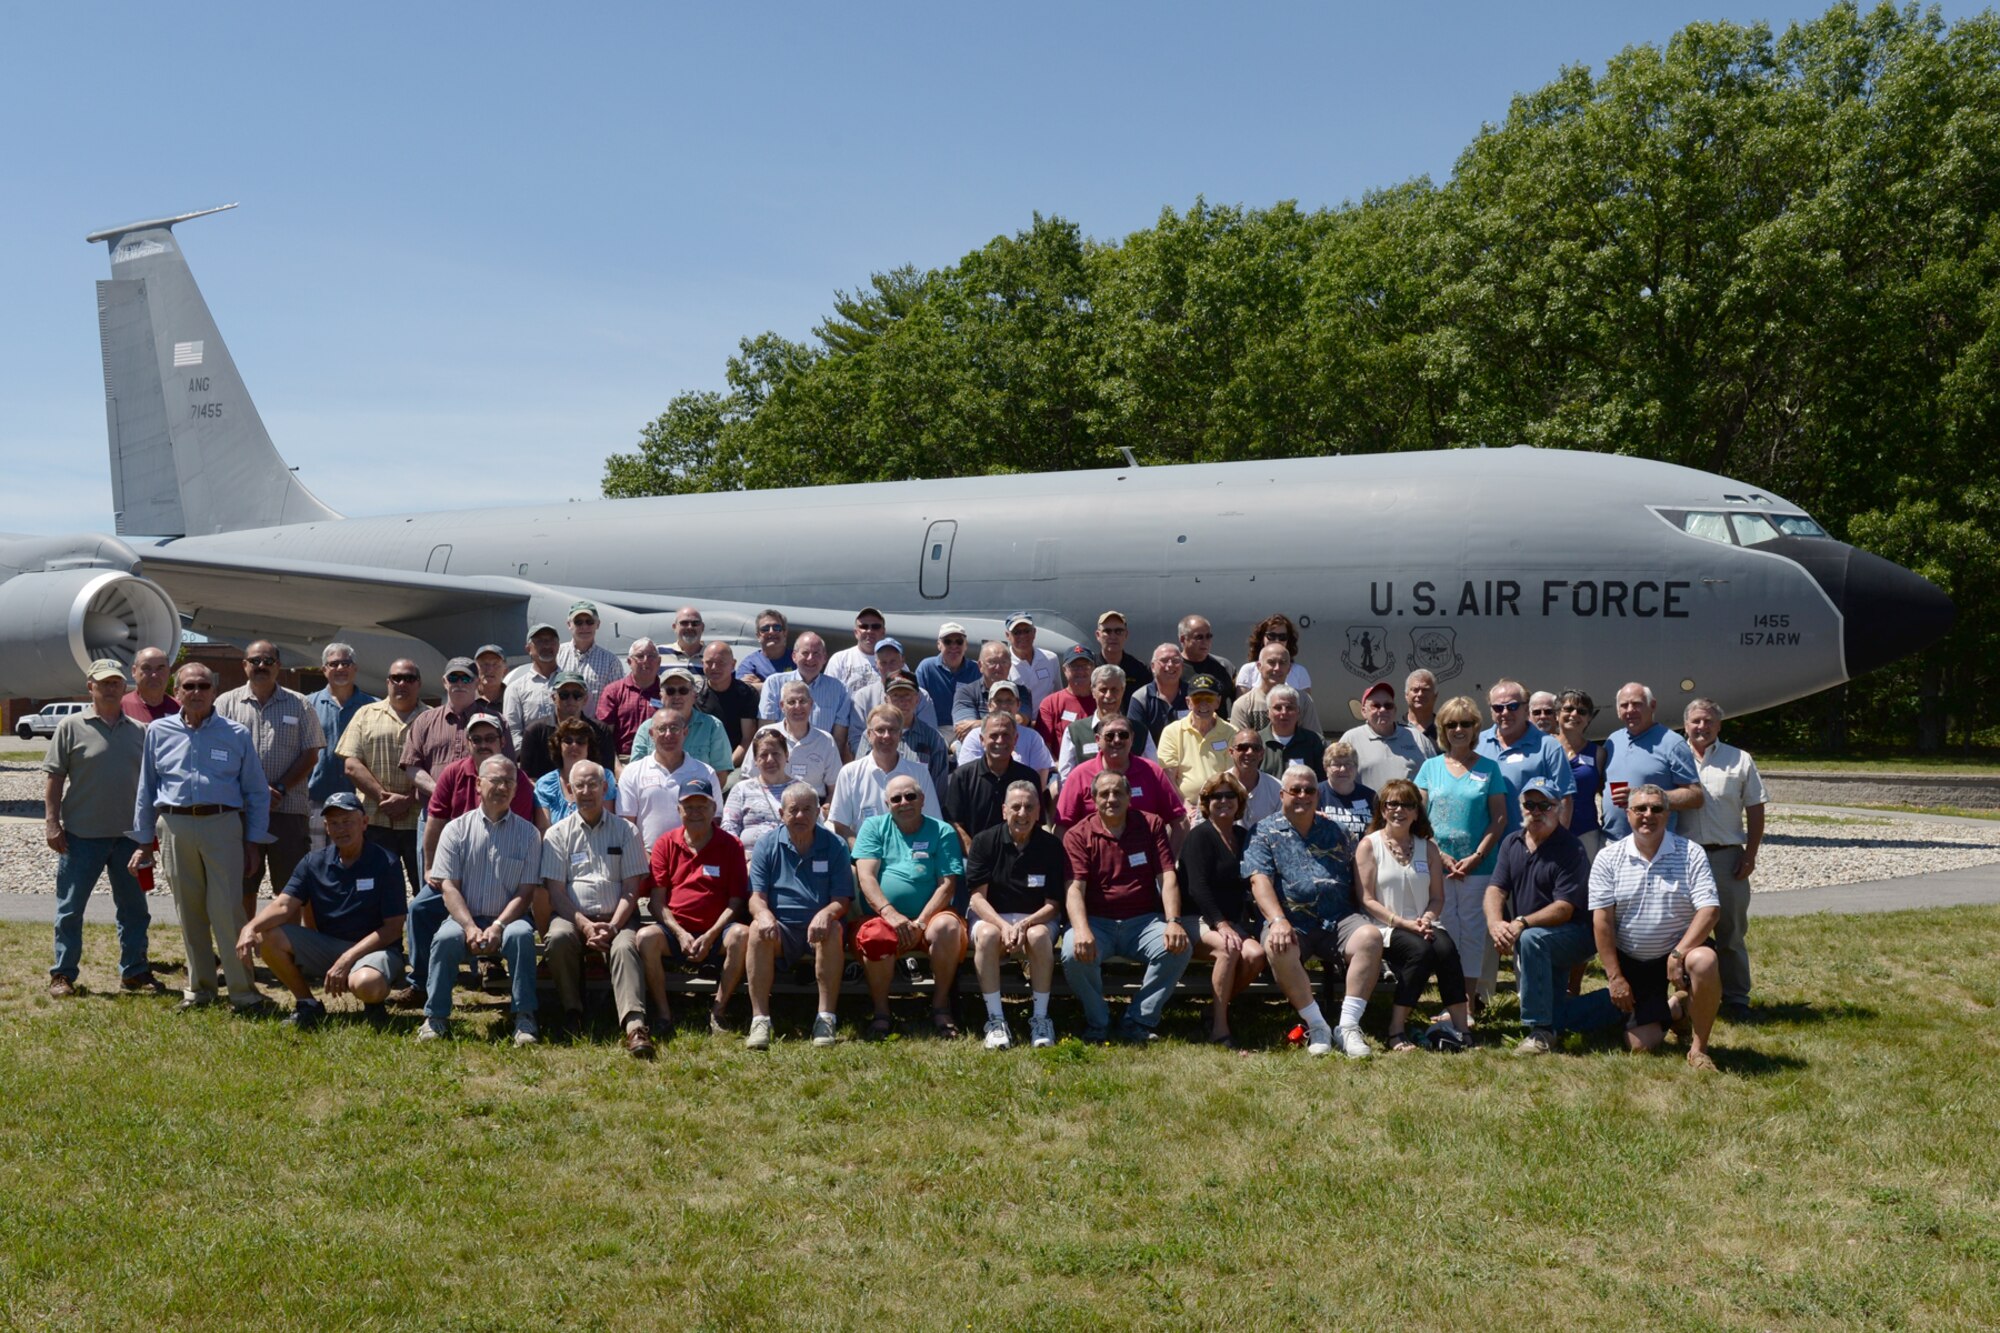 Former members of the 157th Air Refueling Wing pose for a photograph in front of the KC-135 Stratotanker static display during the Annual Retiree Day on June 17, 2015 at Pease Air National Guard Base, N.H.  (U.S. Air National Guard photo by Staff Sgt. Curtis J. Lenz)